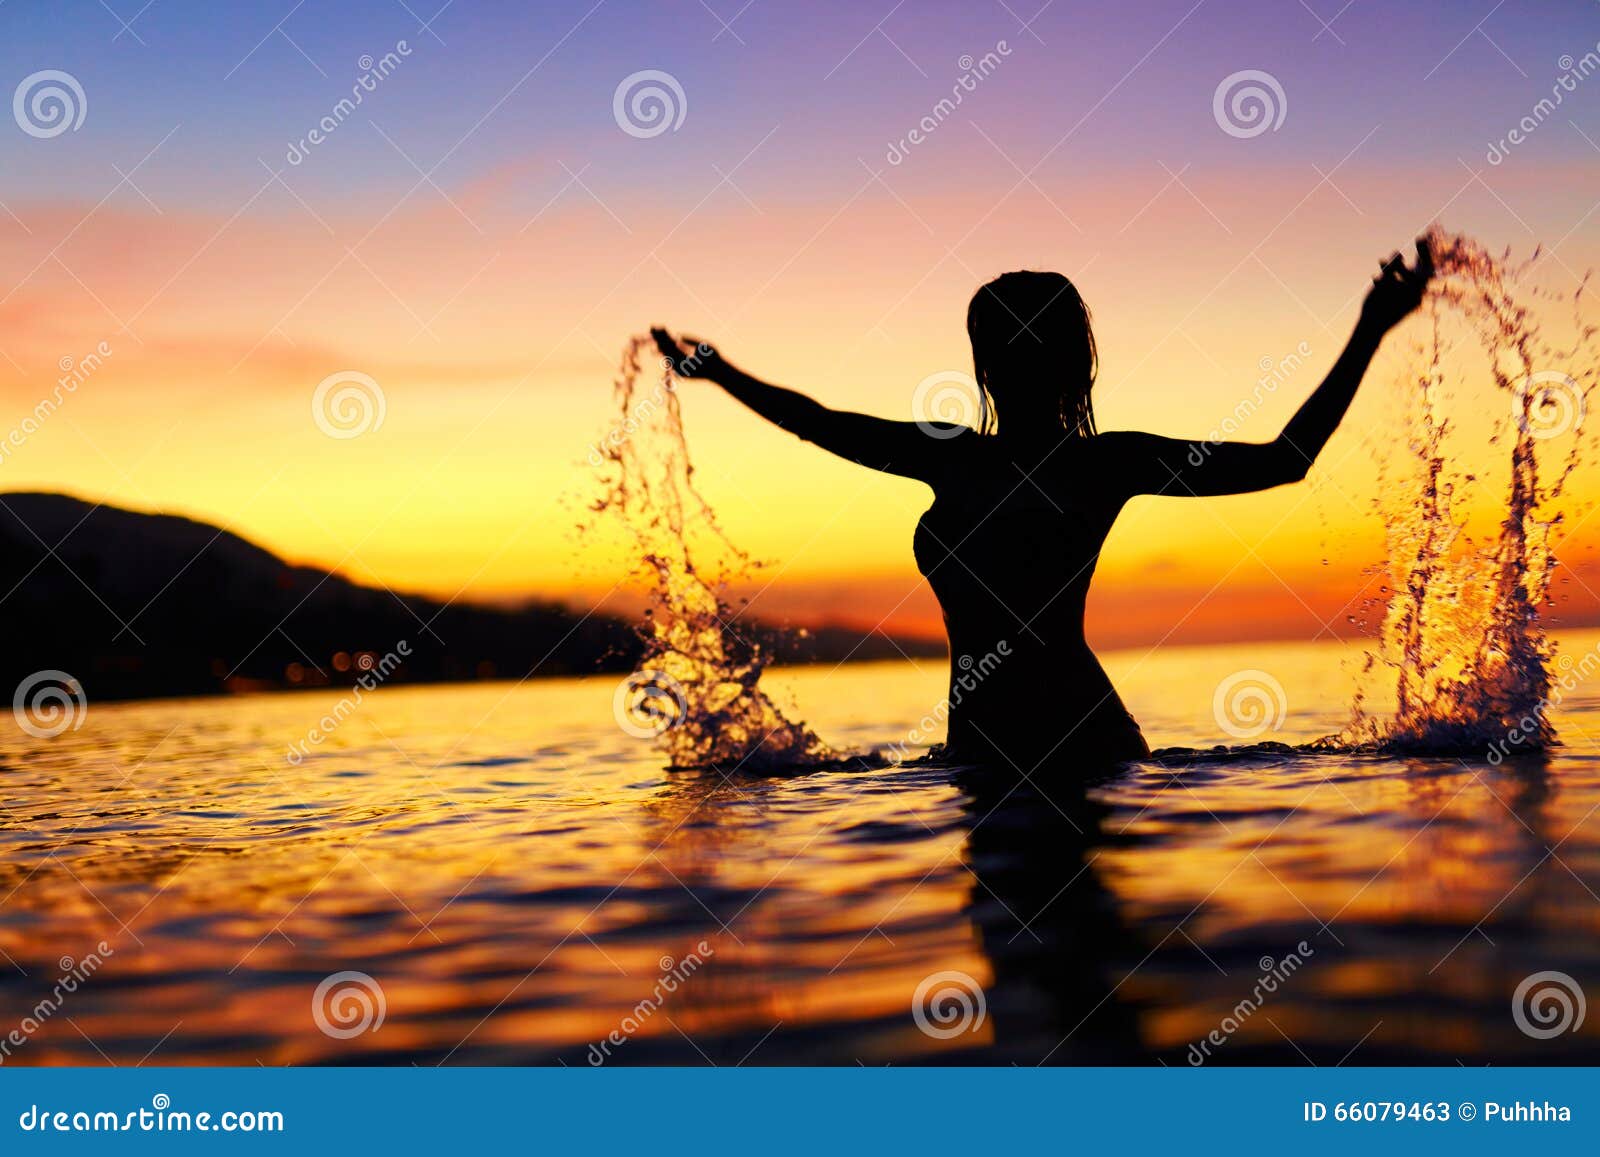 freedom, enjoyment. woman in sea at sunset. happiness, healthy l